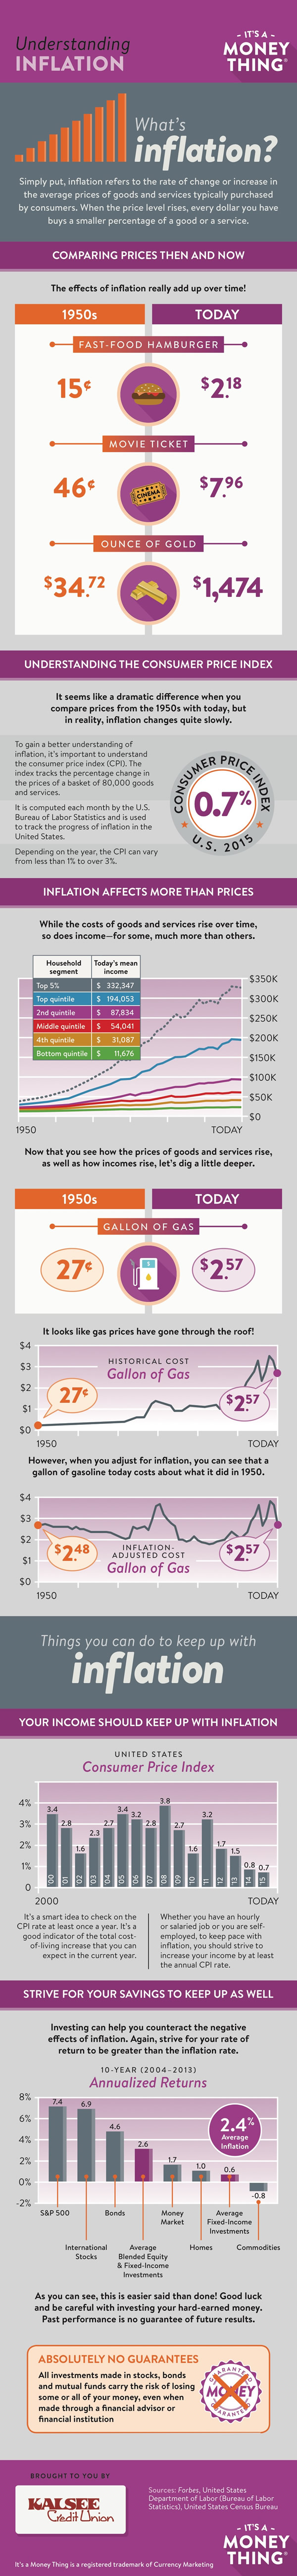 Understanding inflation infographic, click for transcription